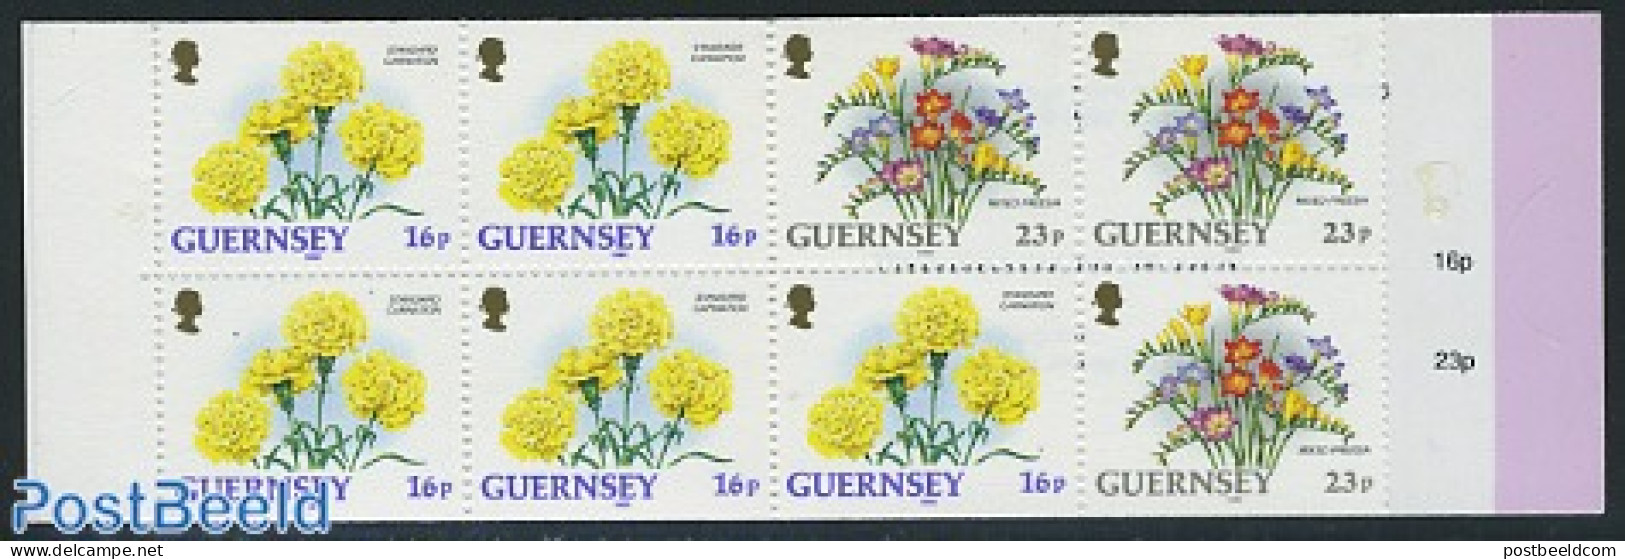 Guernsey 1992 Flowers Booklet, Mint NH, Nature - Flowers & Plants - Stamp Booklets - Unclassified